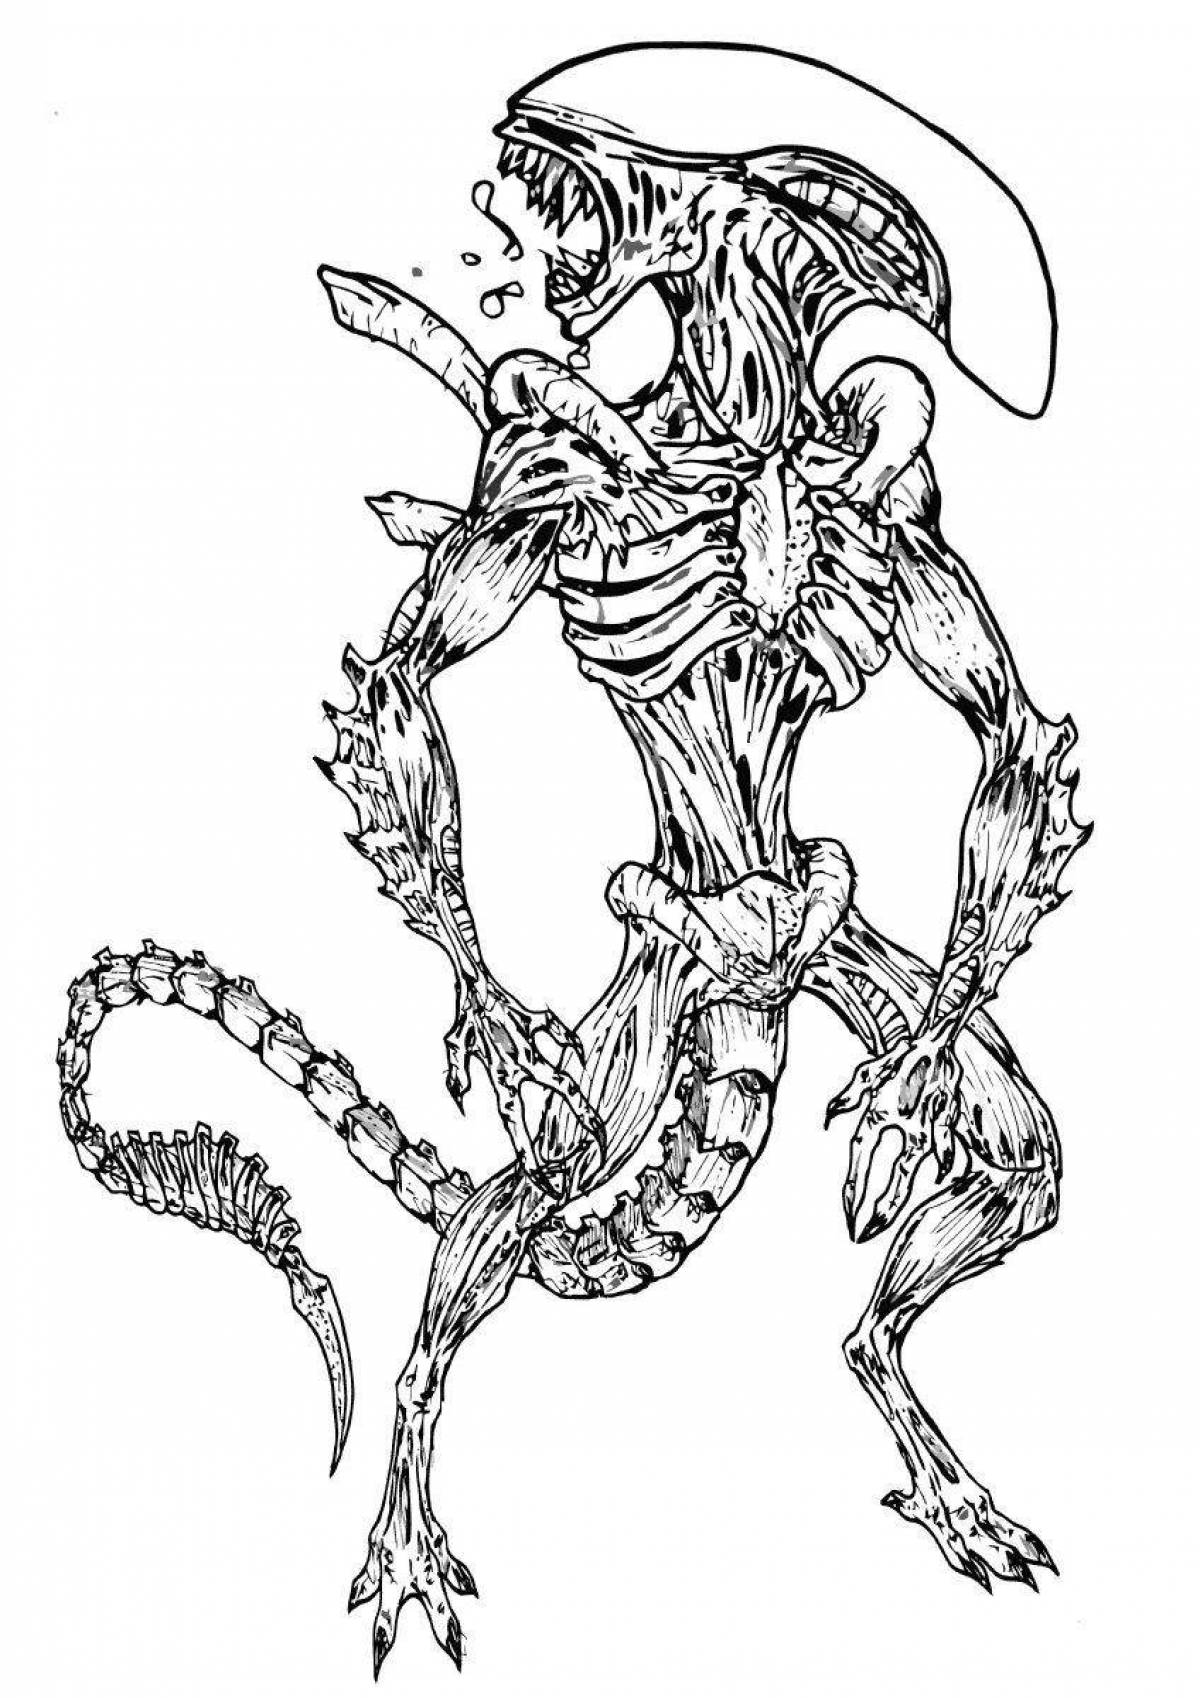 Coloring page unknown siren-headed monster